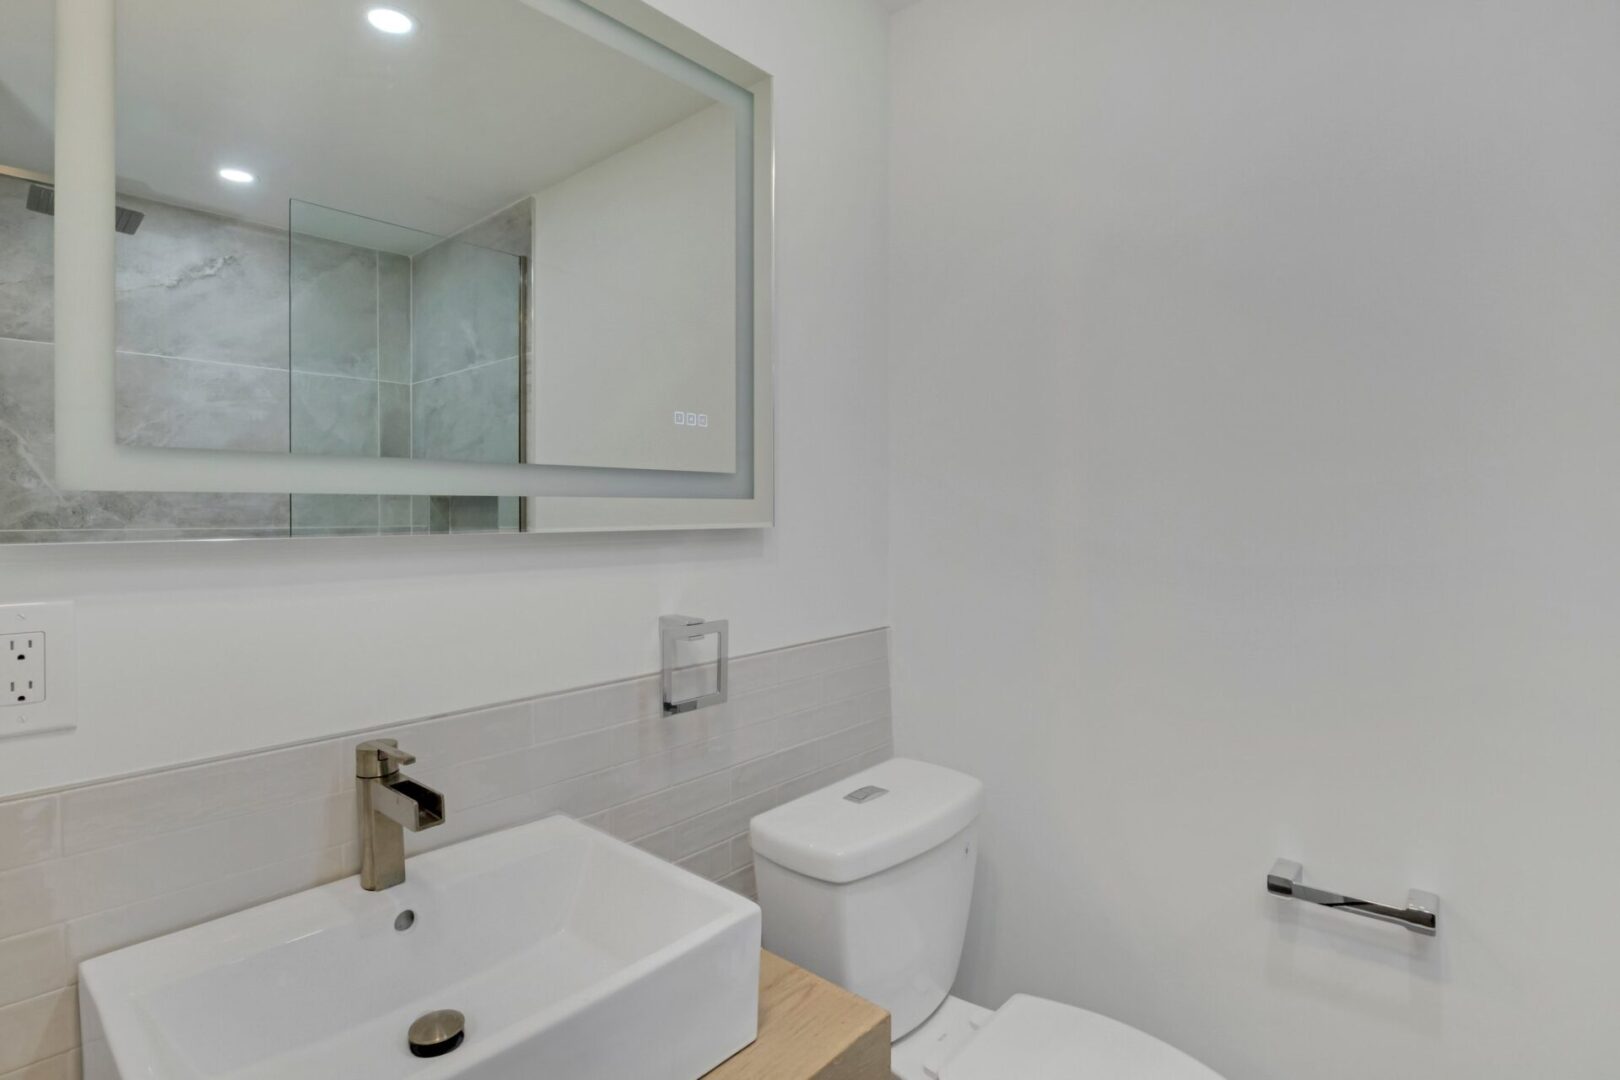 A bathroom with white walls and a mirror.